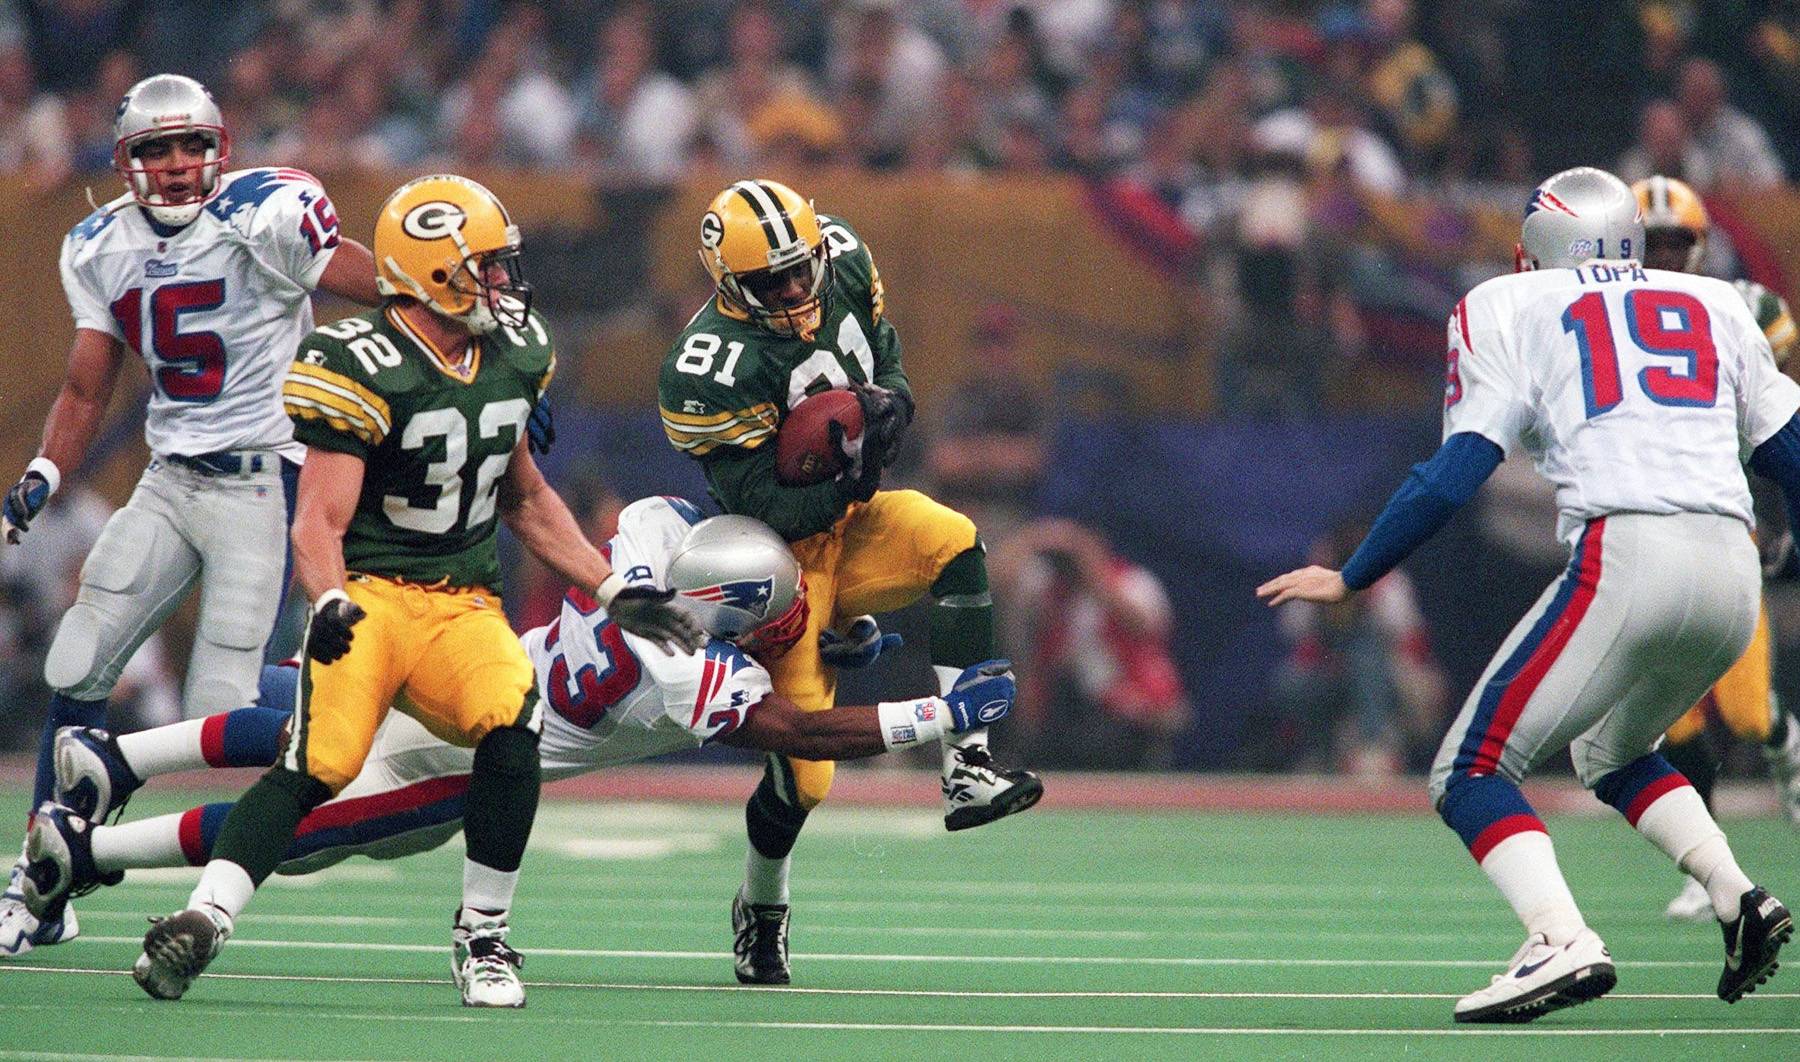 20. Super Bowl XXXI - Image 2 from Top 20 Super Bowl Moments